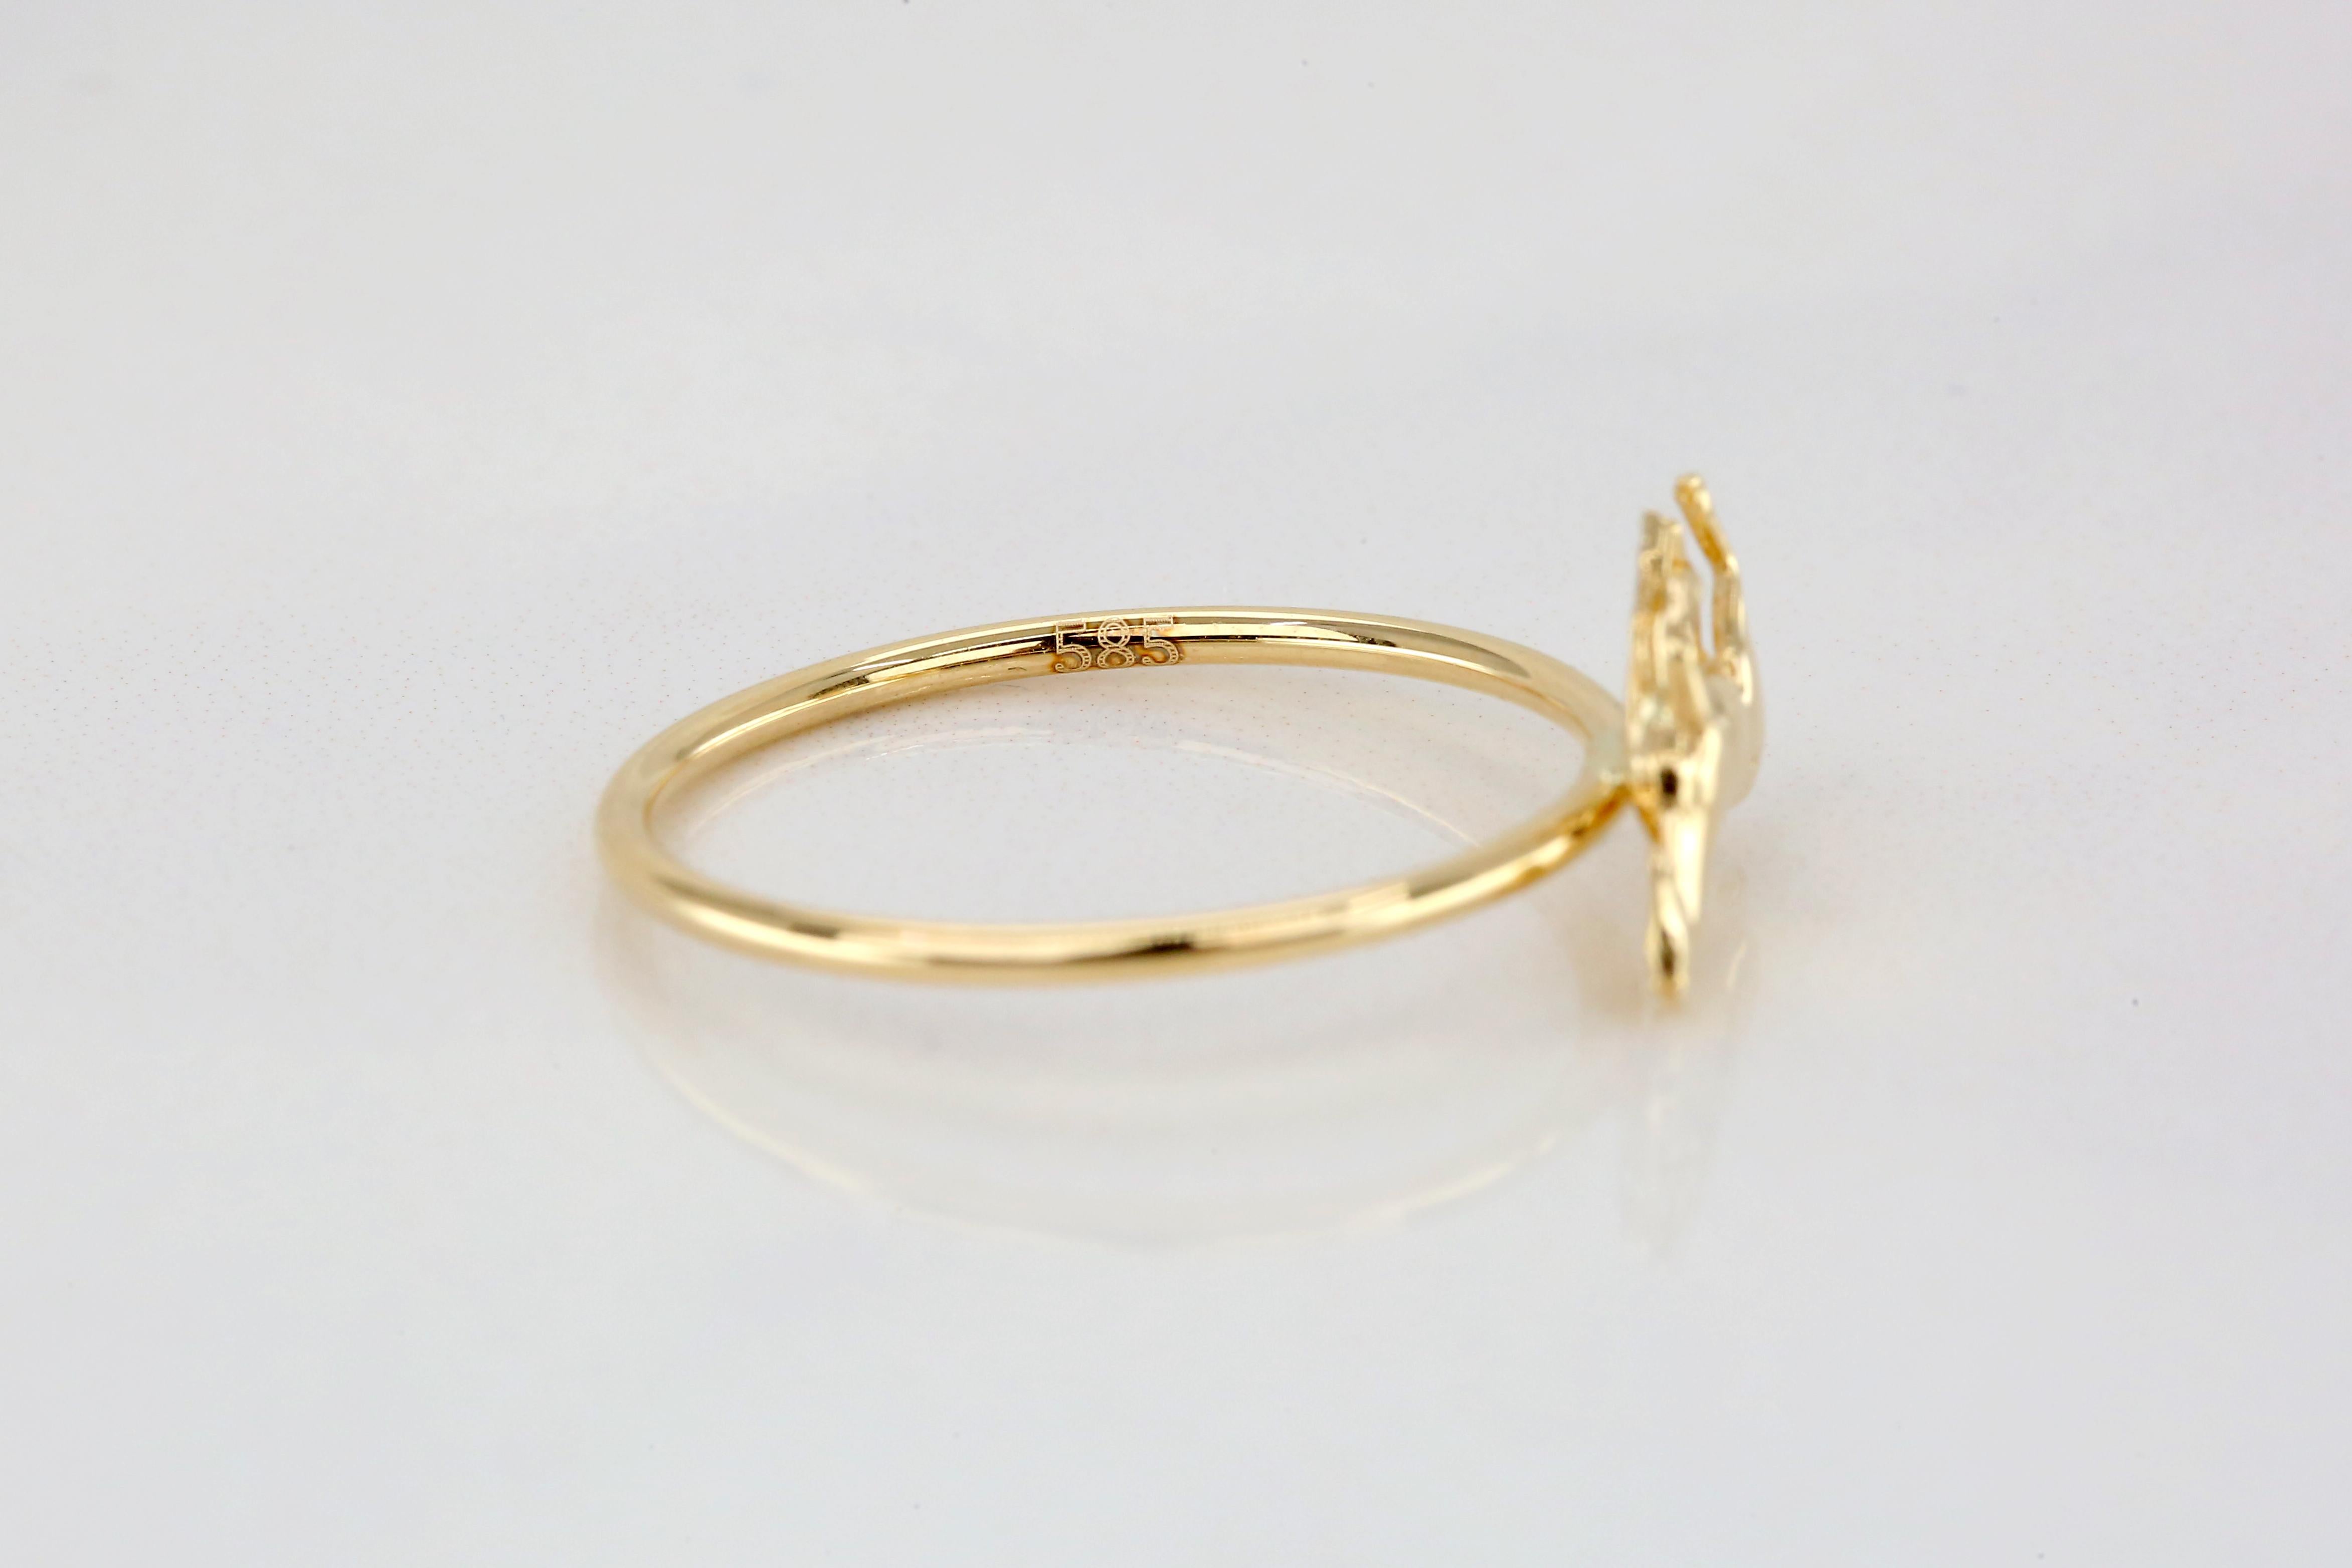 For Sale:  14K Gold Horse Ring, Pinky Horse Ring, 14K Gold Horse Animal Ring 8